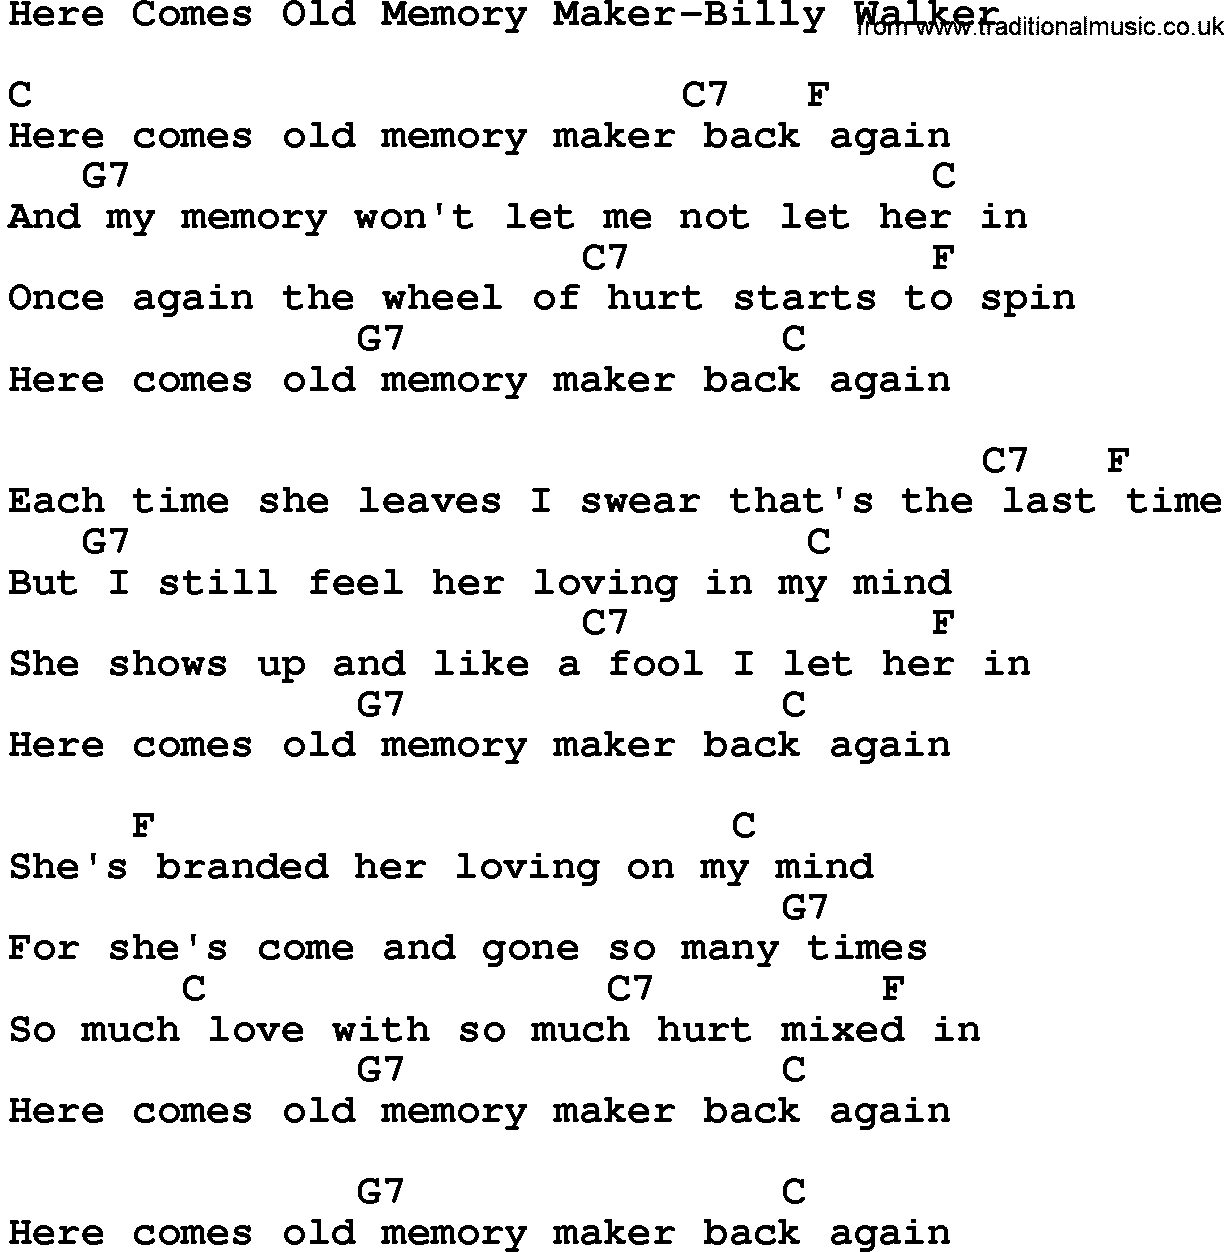 Country music song: Here Comes Old Memory Maker-Billy Walker lyrics and chords